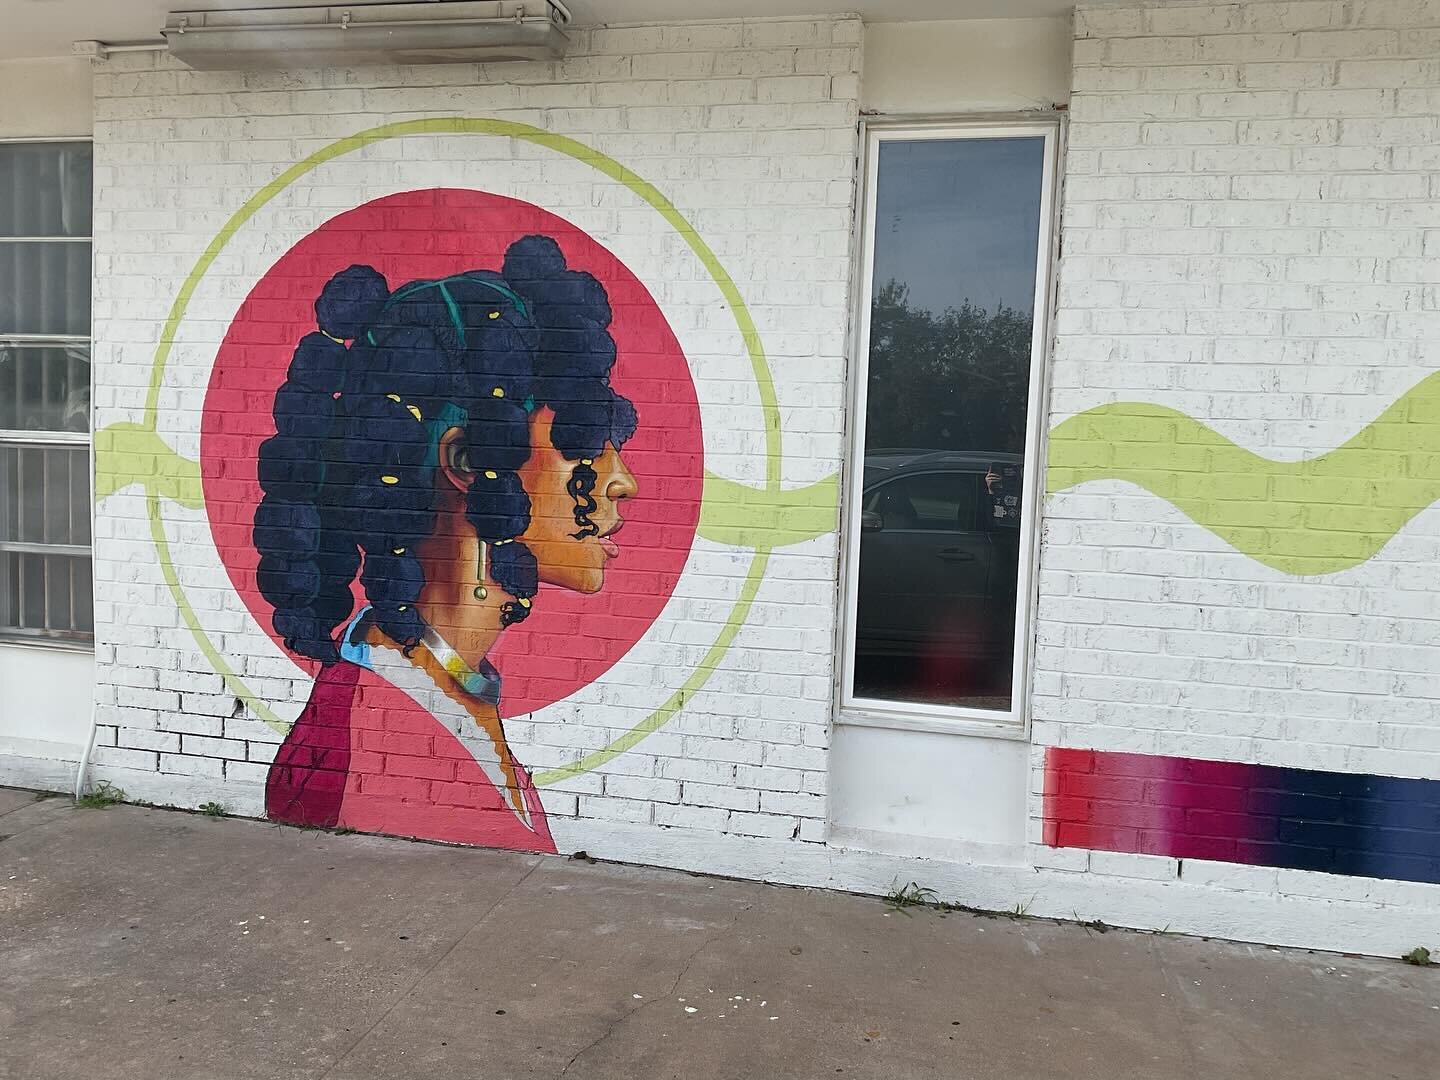 After our meeting this morning, we dropped off some books at the Inside Books Project and were rewarded with a view of this beautiful artwork. #atx #ethicalaustin #ethicalaction @insidebooksproject